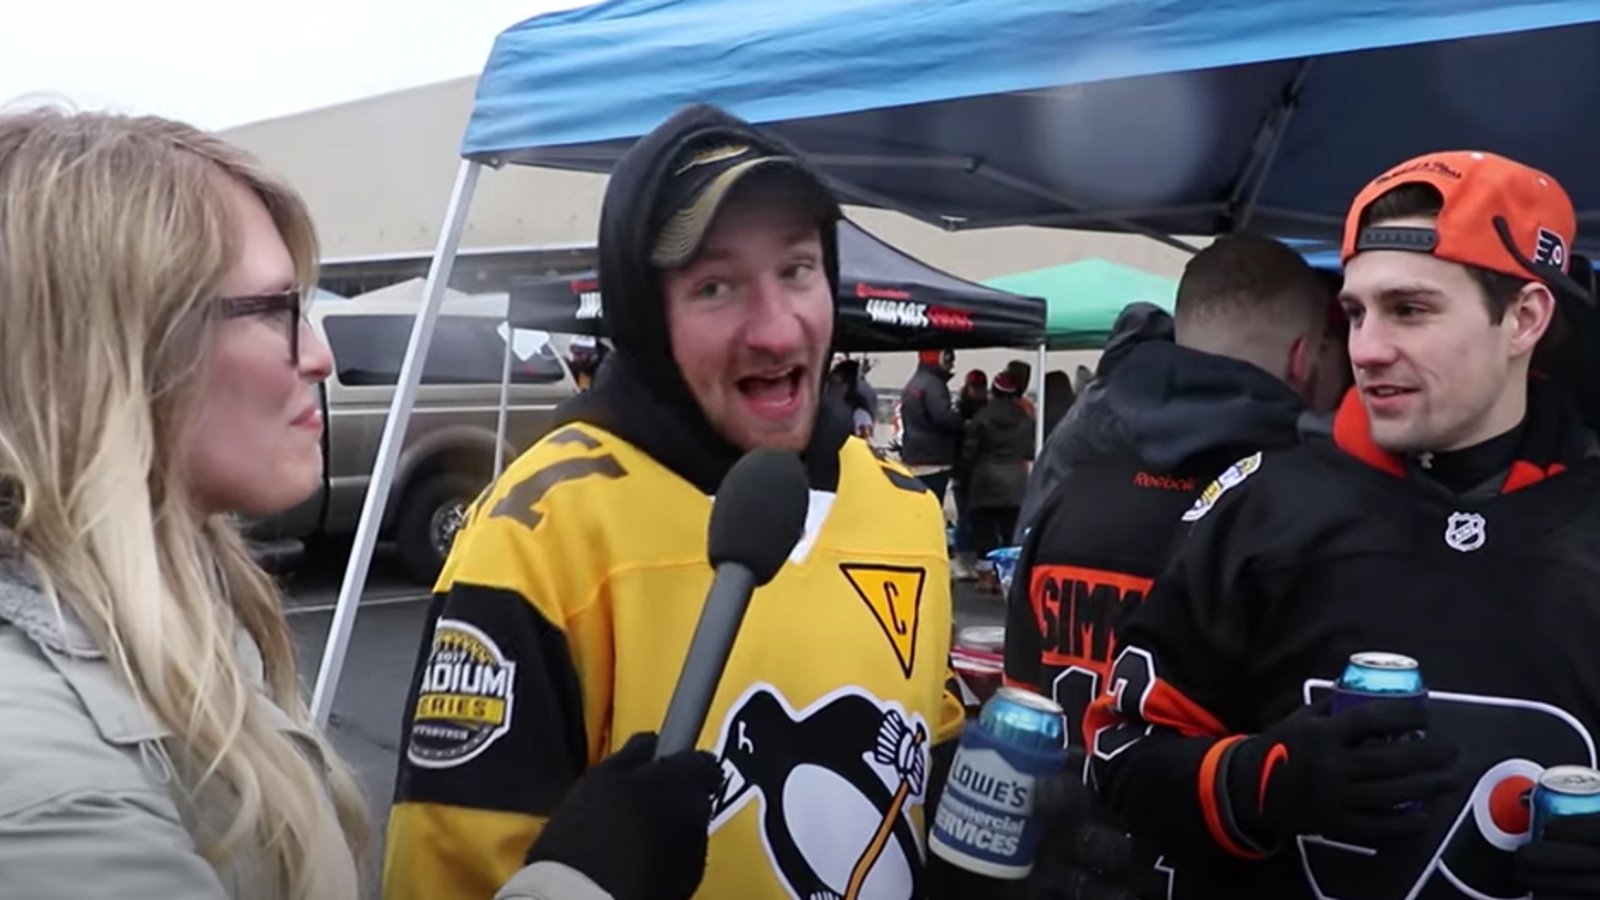 Flyers fans and Penguins fans attempt to say nice things about each other